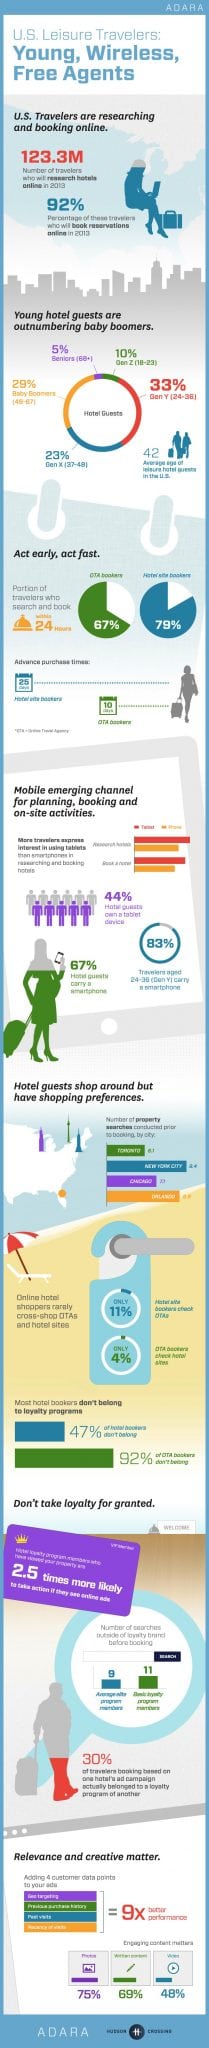 infographic-us-leisure-trends-2013-1